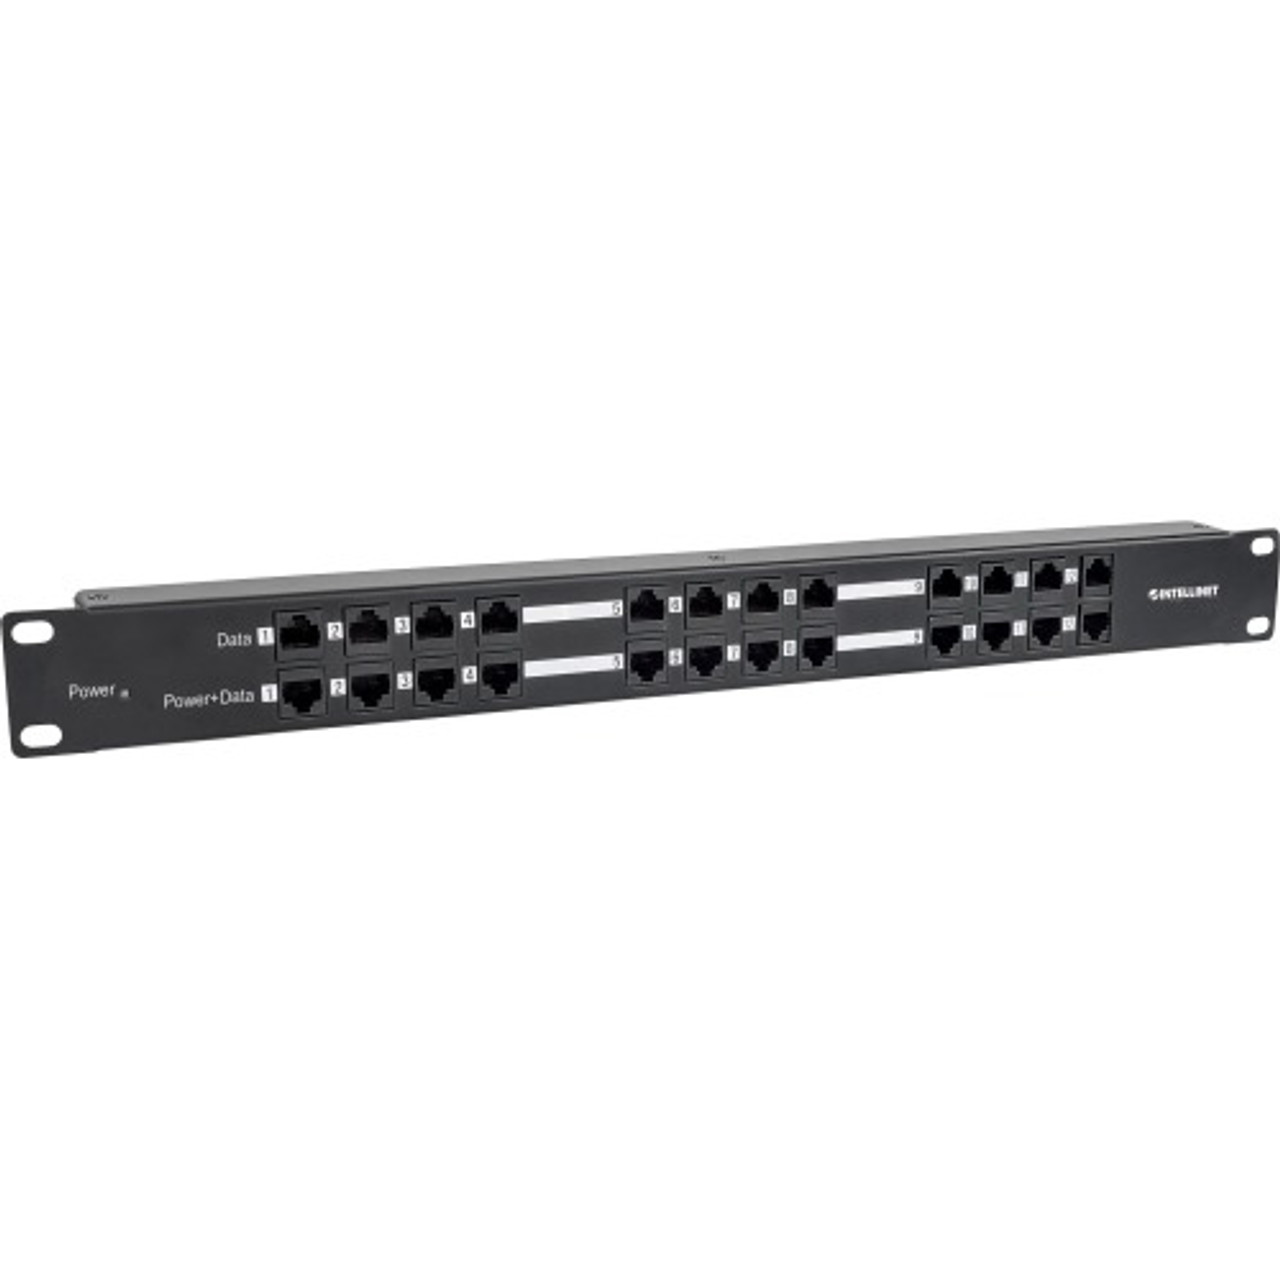 720342 Intellinet Network 24-Ports Patch Panel With 12 PoE Injector Ports (12x RJ-45 Port Data and Power Out)